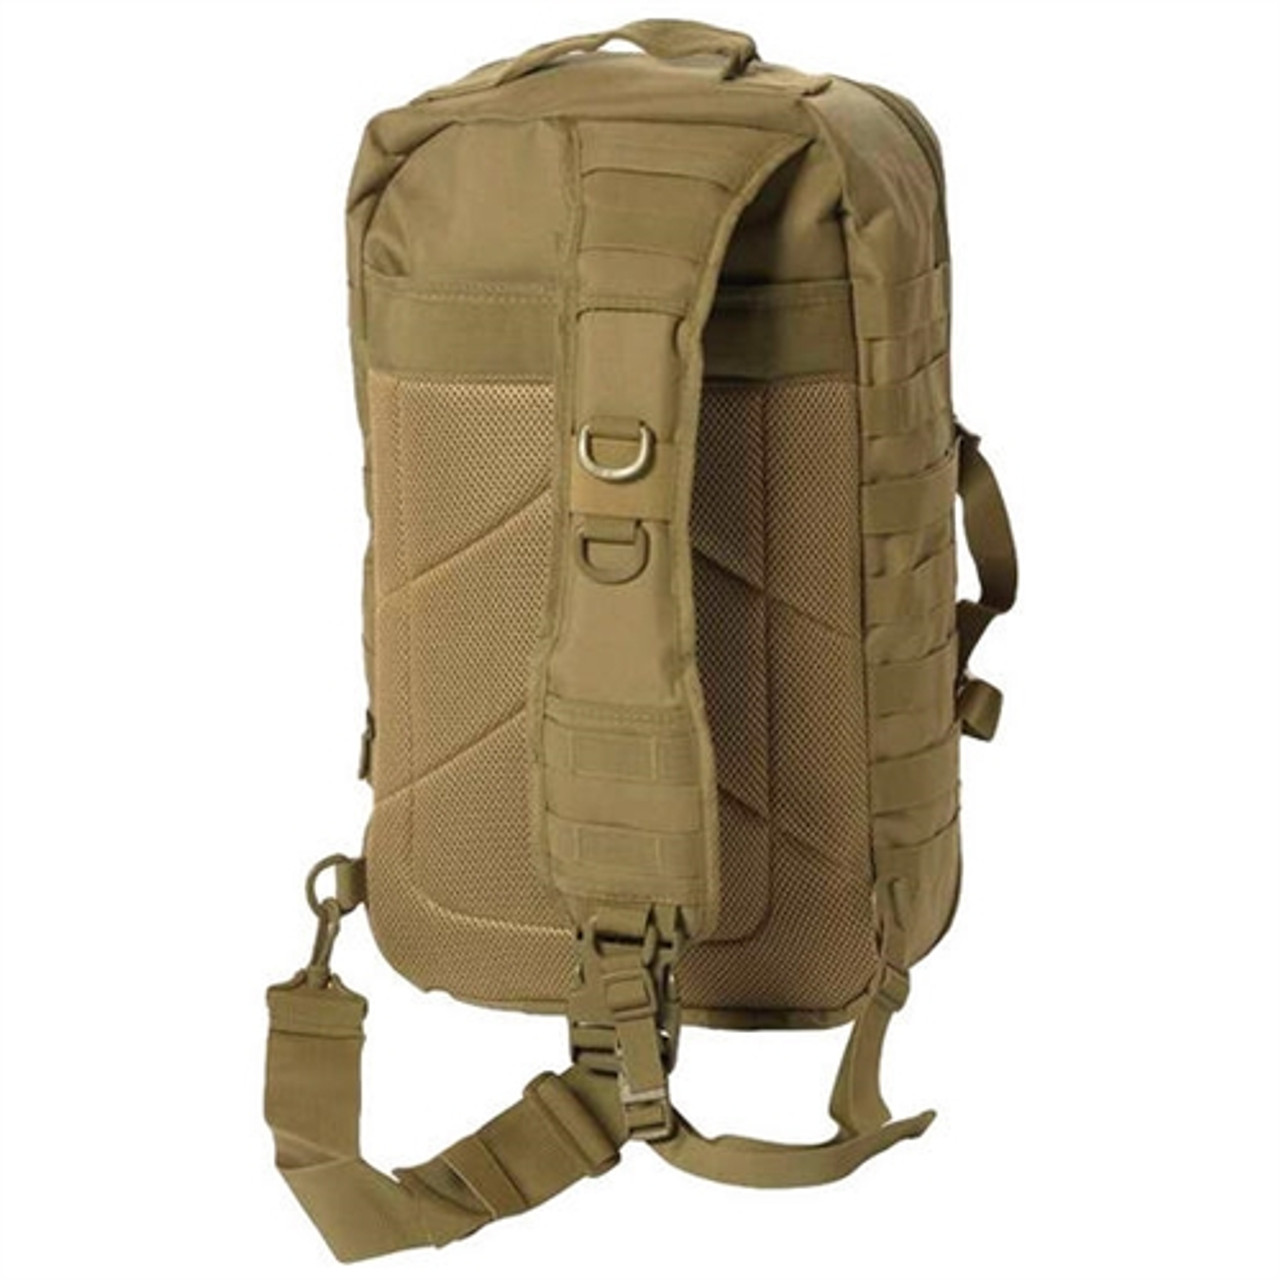 MIL-TEC Single Strap Large Assault Pack from Hessen Tactical